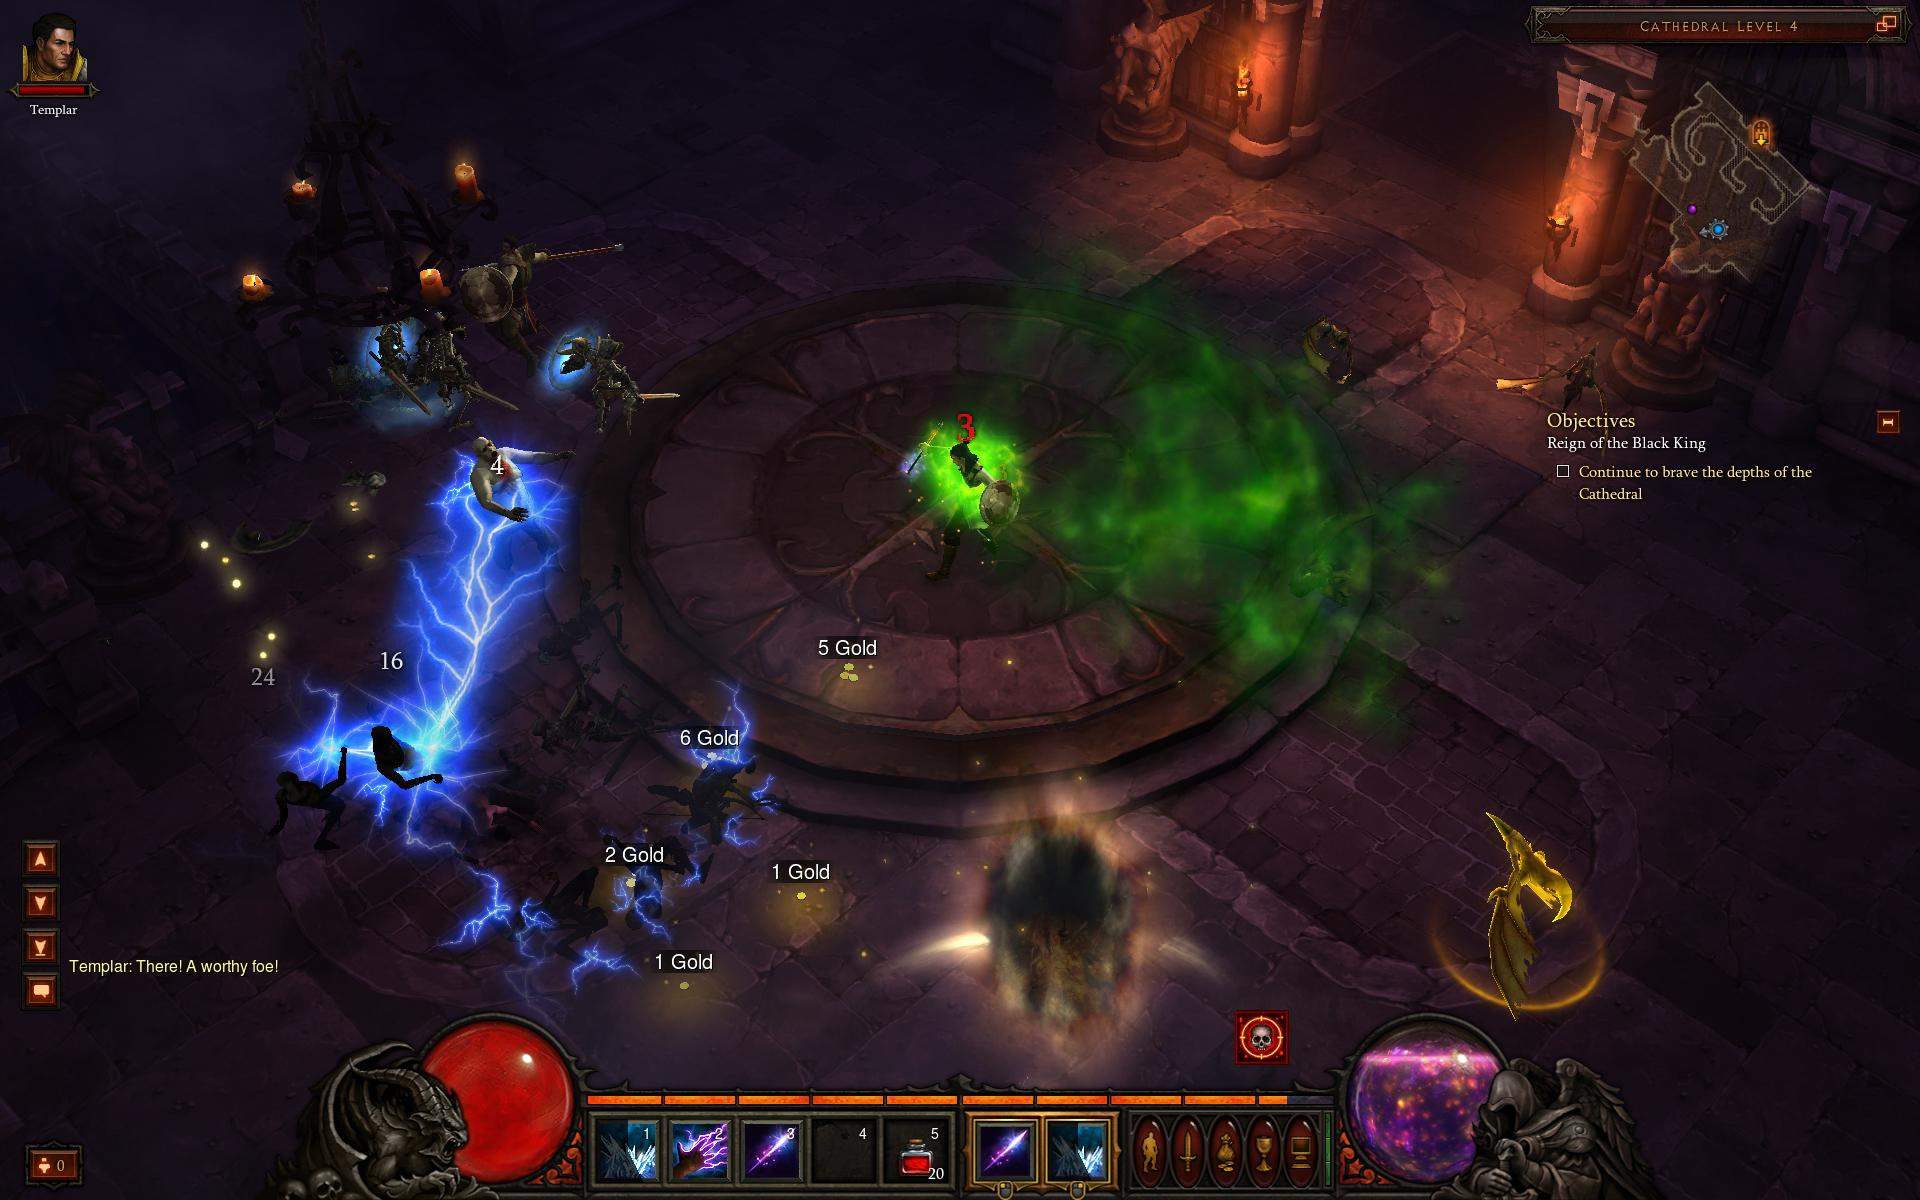 can you monetize diablo 3 gameplay on youtube?